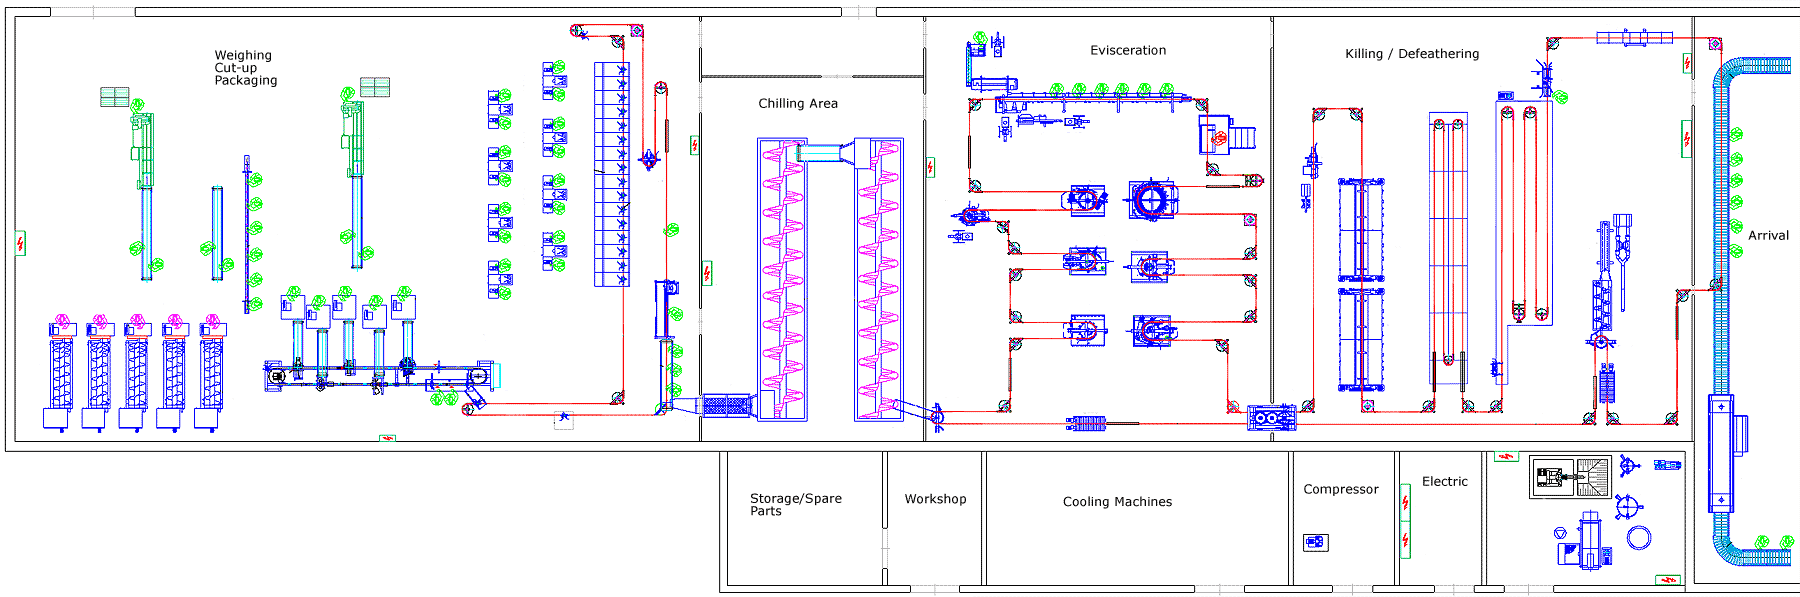 6000bph factory layout